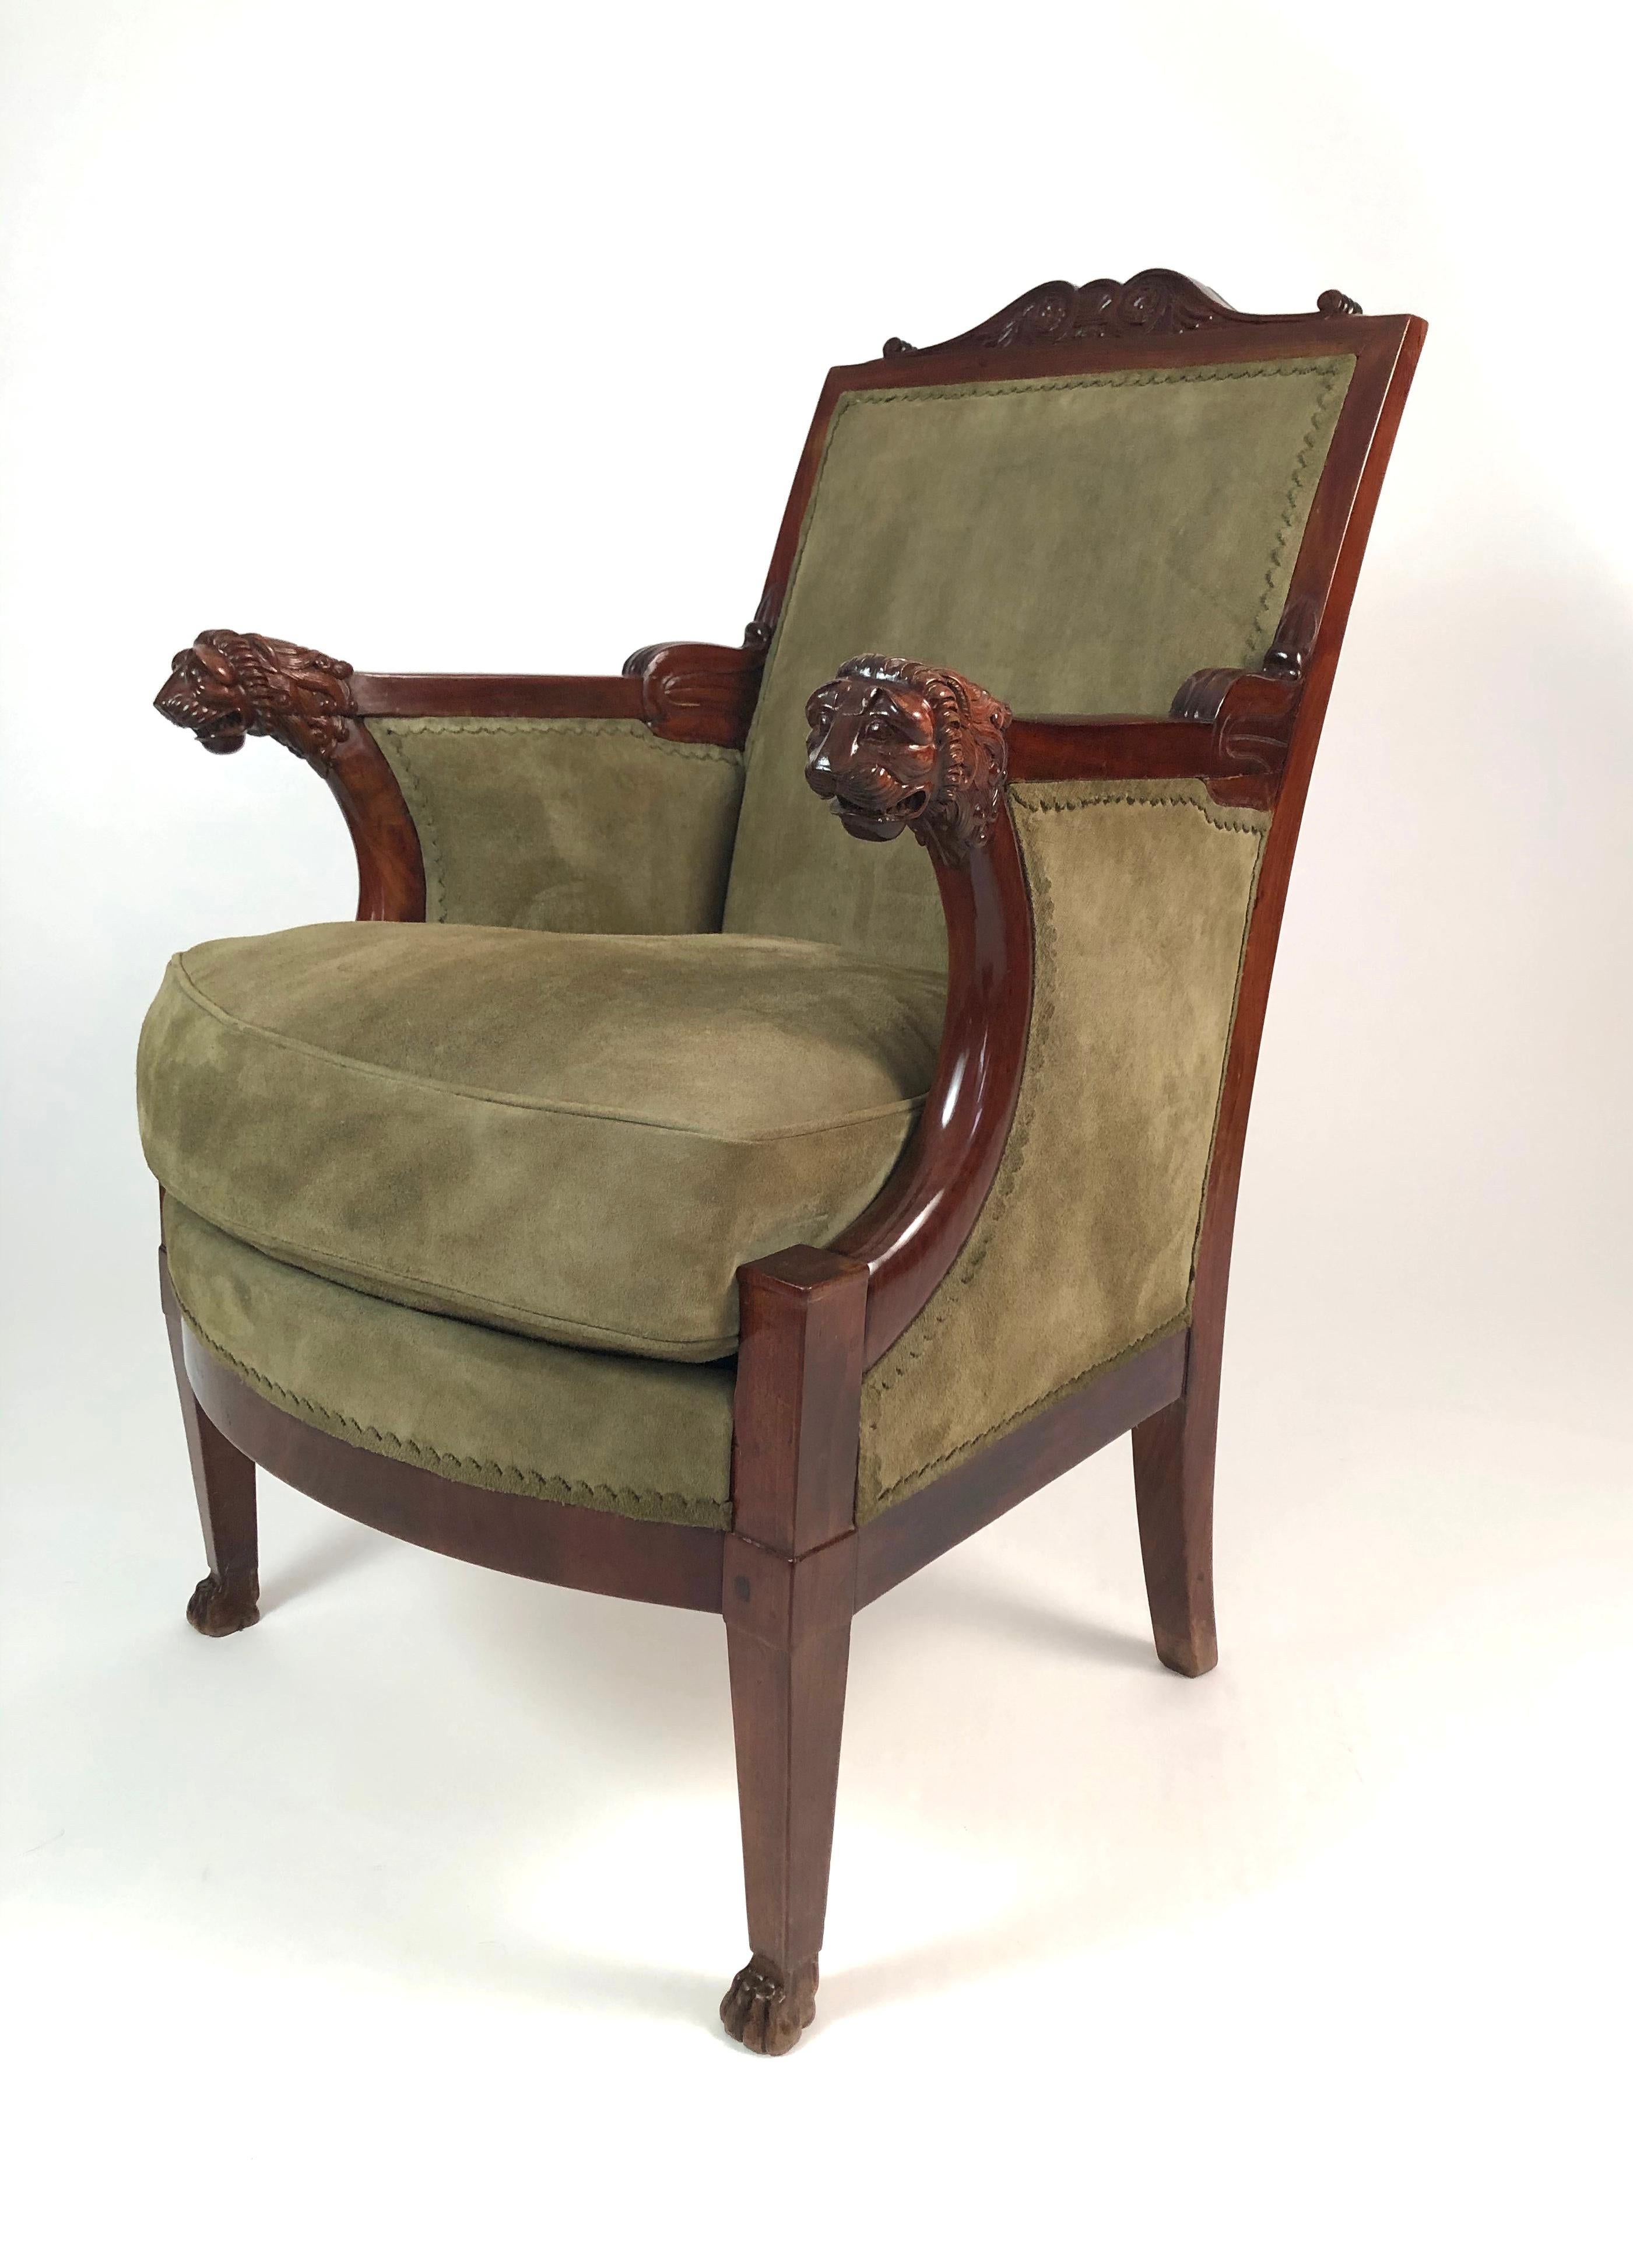 A fine quality French Empire period fauteuil, a generously proportioned armchair, in mahogany, and upholstered to the highest standards in sage green suede with scalloped trim and full down seat cushion, the canted rectangular back with carved